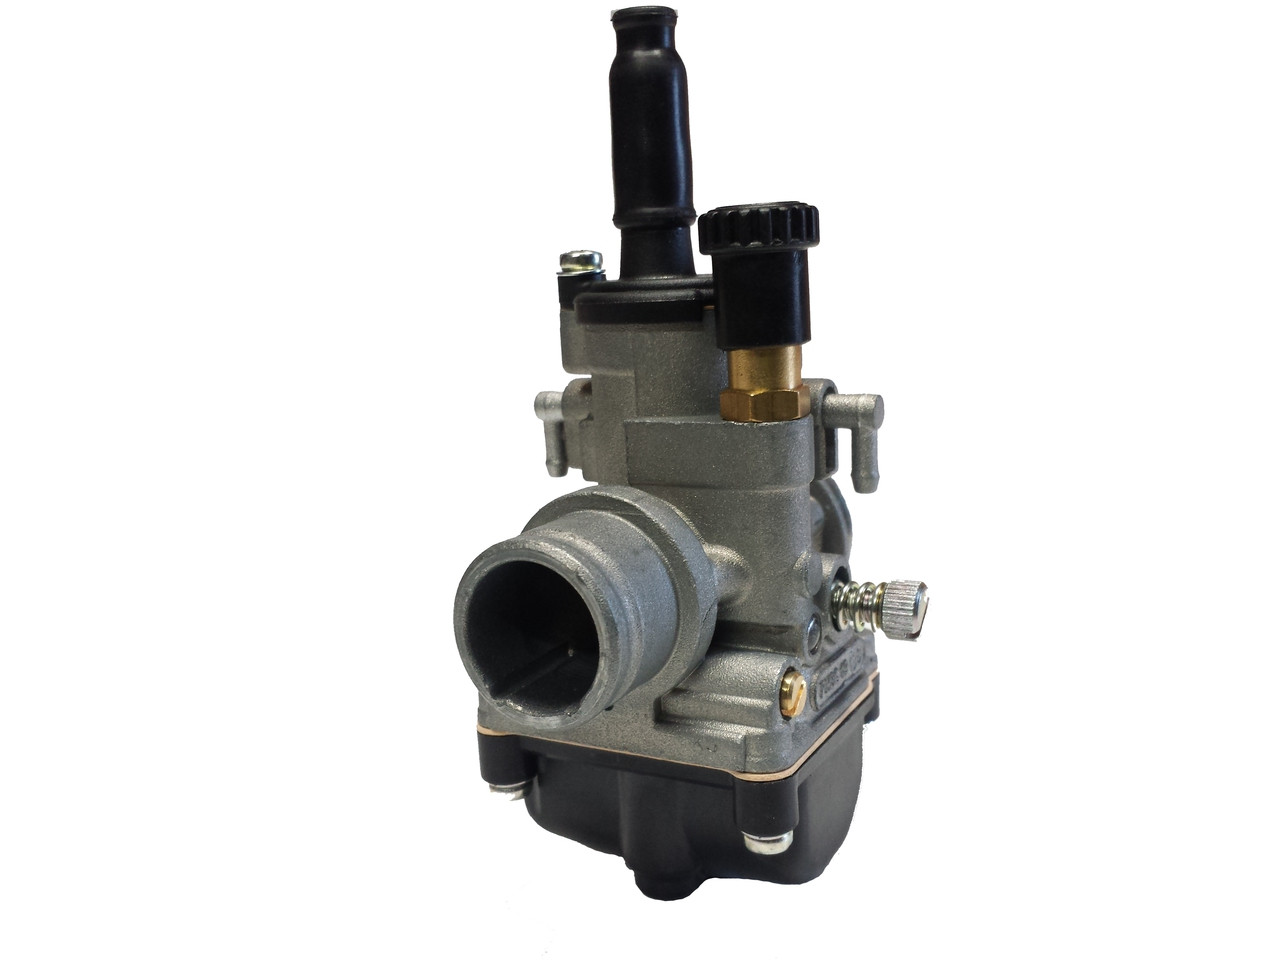 Dellorto 19mm Phbg Bs Carburetor With Pull Choke Moped Division